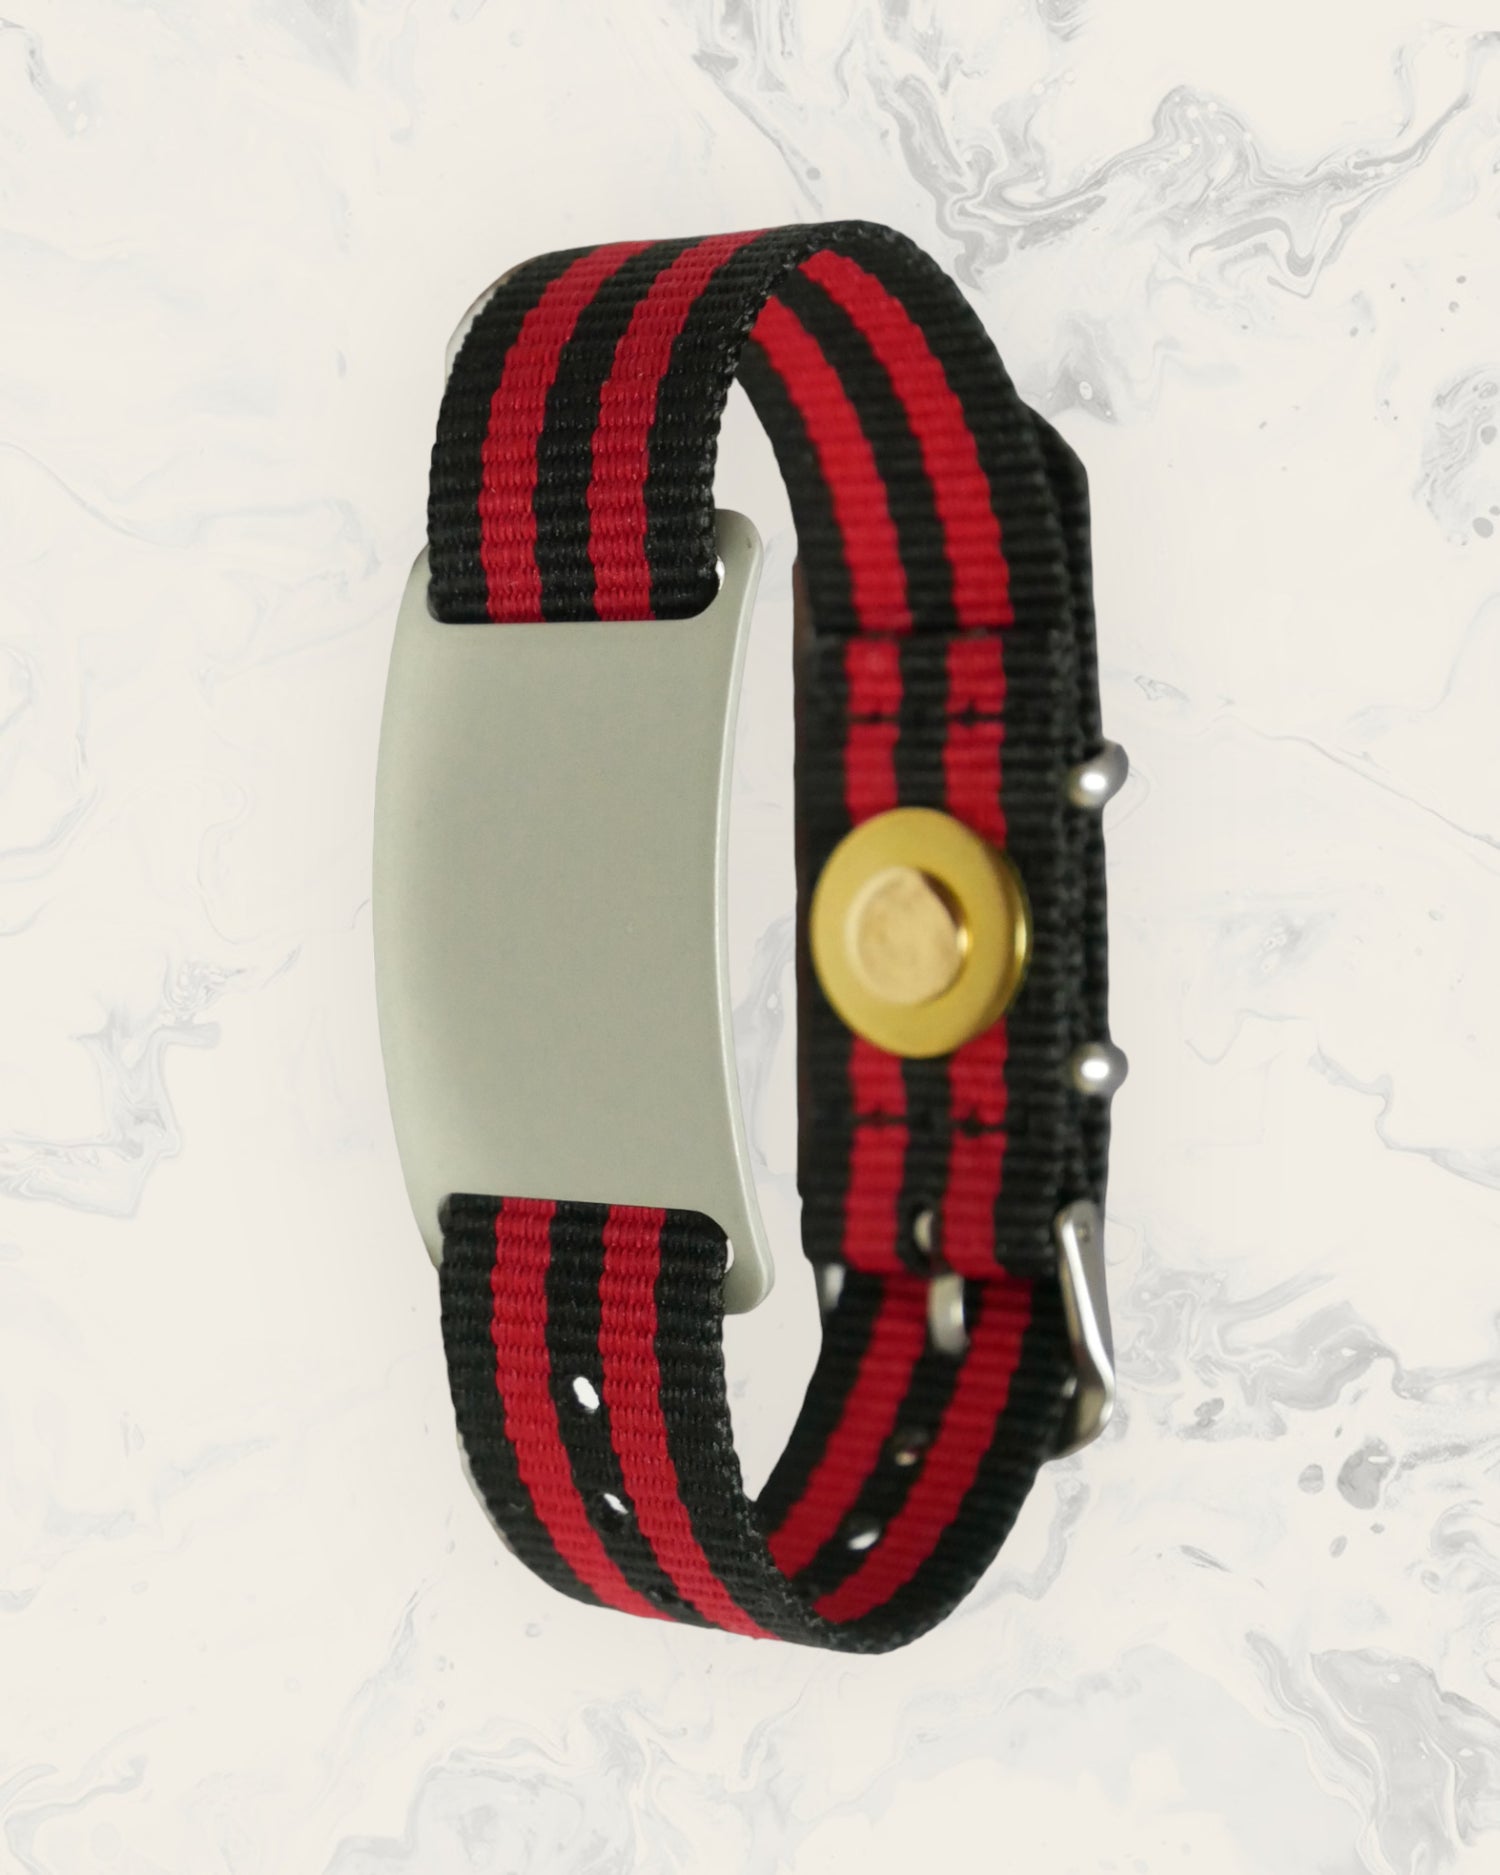 Frequency Jewelry Natural Pain Relief and EMF Protection Bracelet Nylon Band Color Black and Red Striped with a Silver Slider